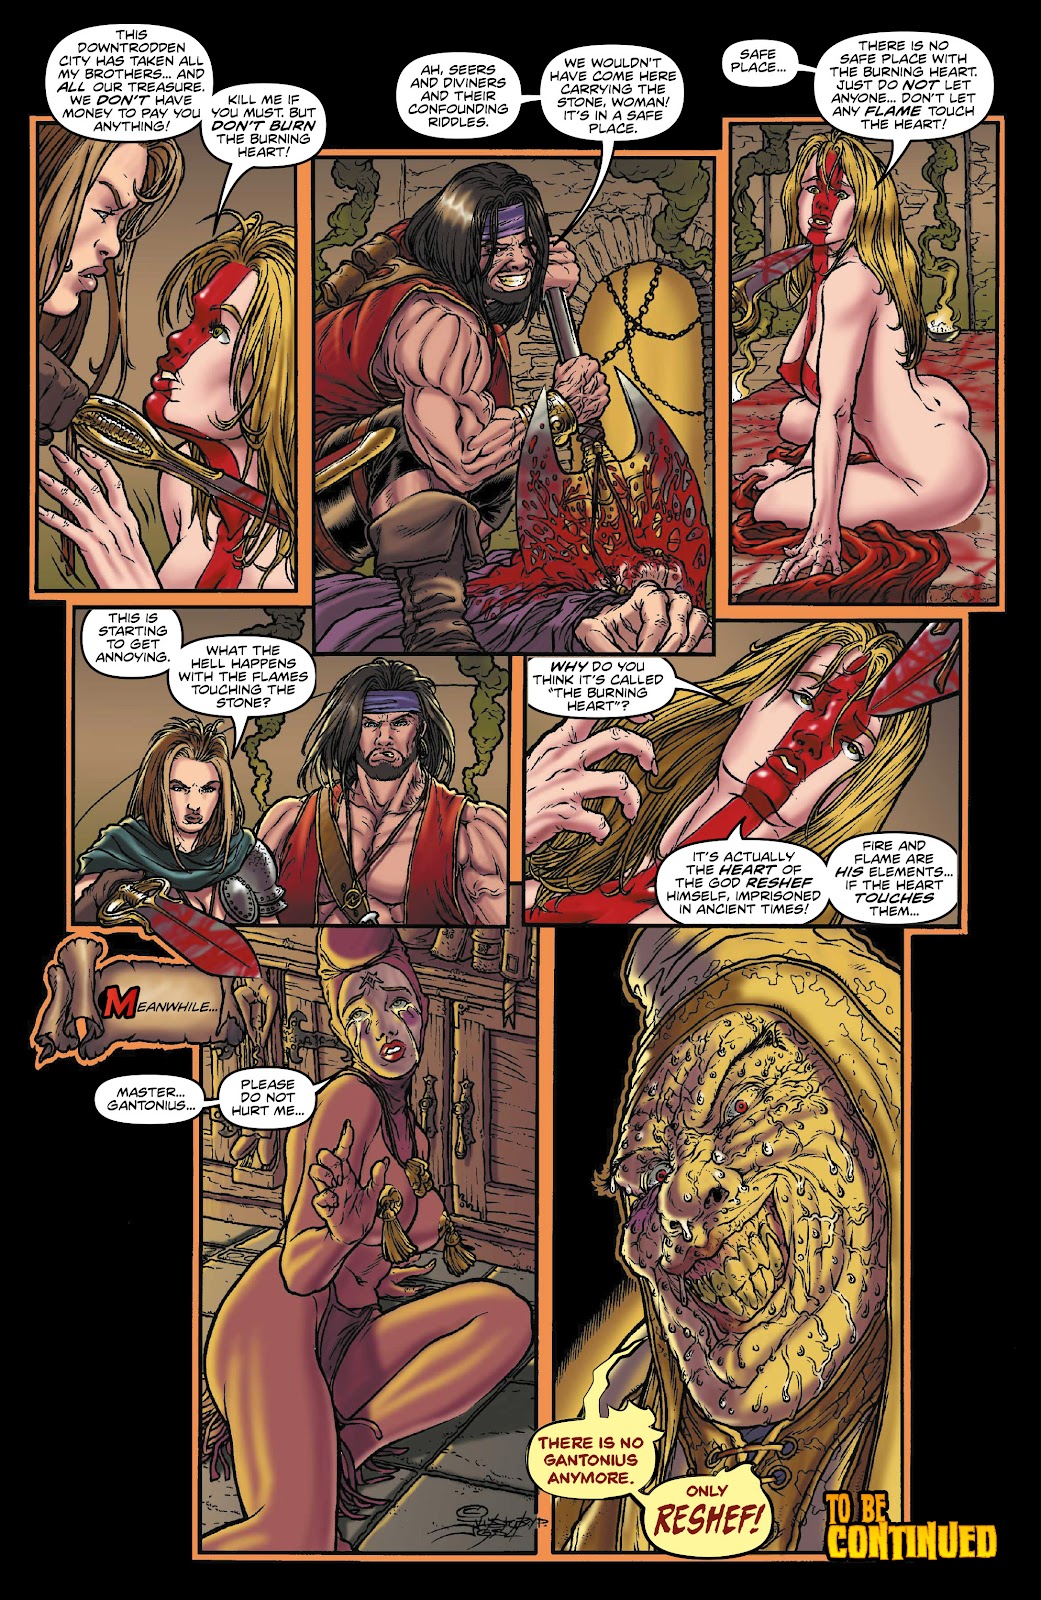 Rogues!: The Burning Heart issue 2 - Page 26